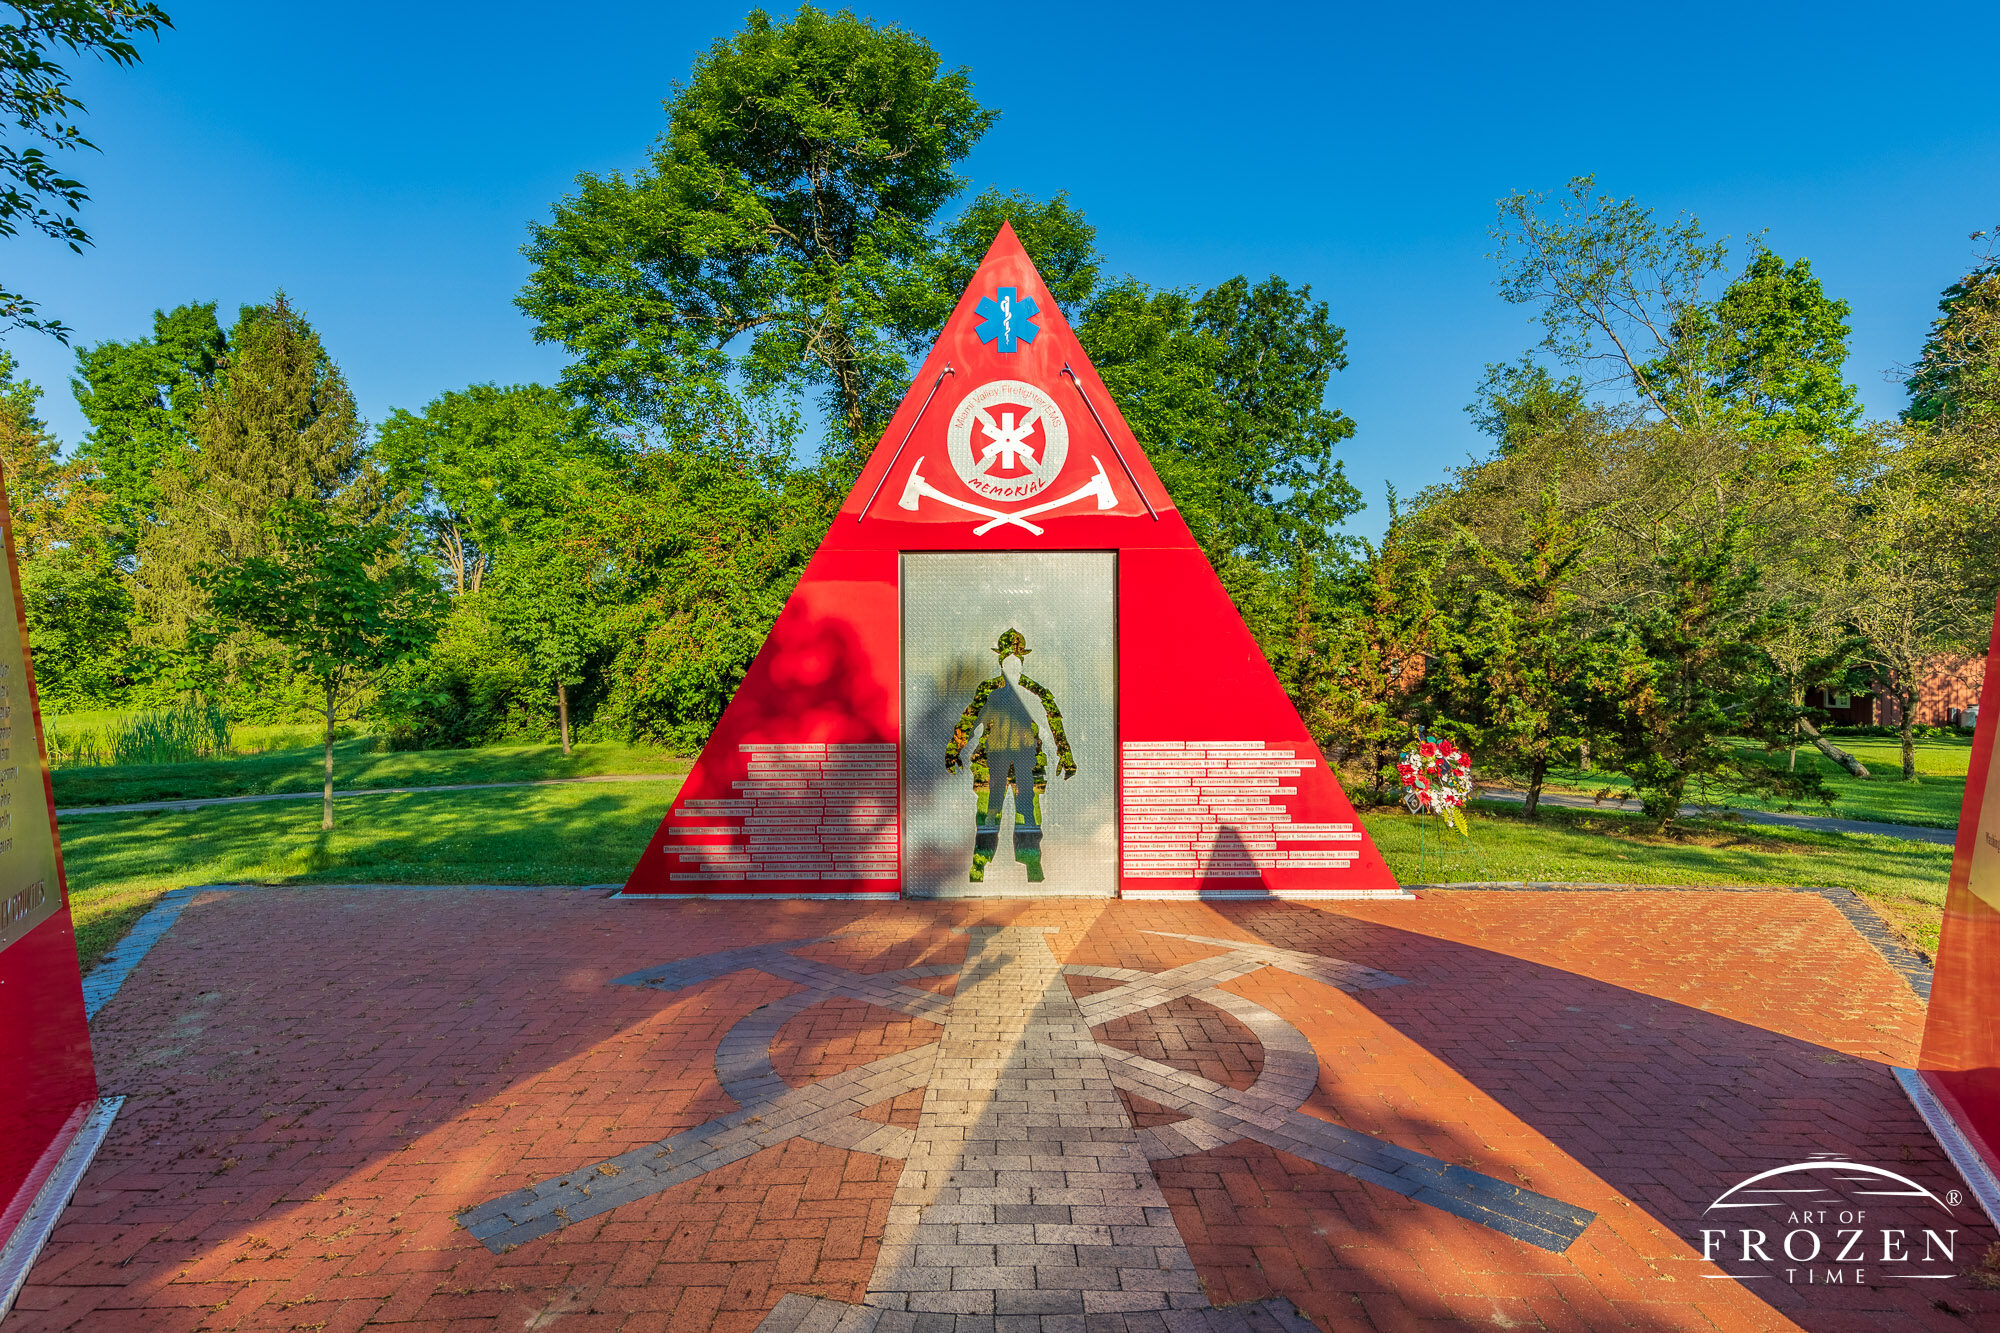 A sculpture honoring Miami Valley Firefighters called Firewall lies in Stubbs Park, Centerville Ohio basks in the golden morning light